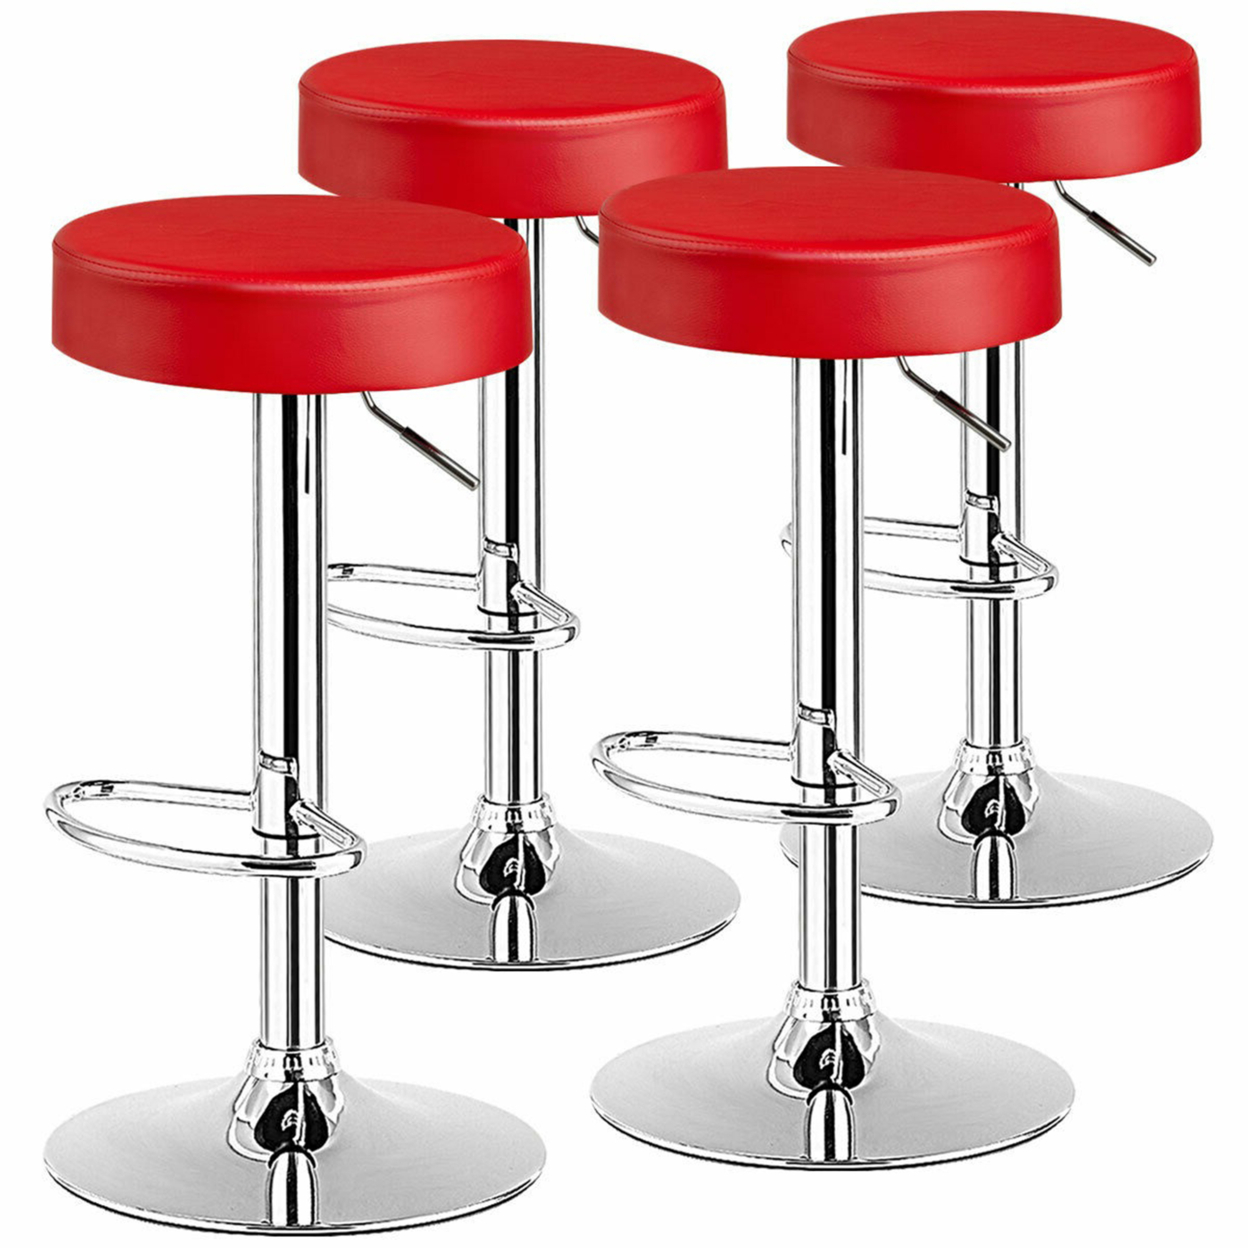 4PCS Adjustable Swivel Bar Stool PU Leather Kitchen Counter Bar Chairs Red